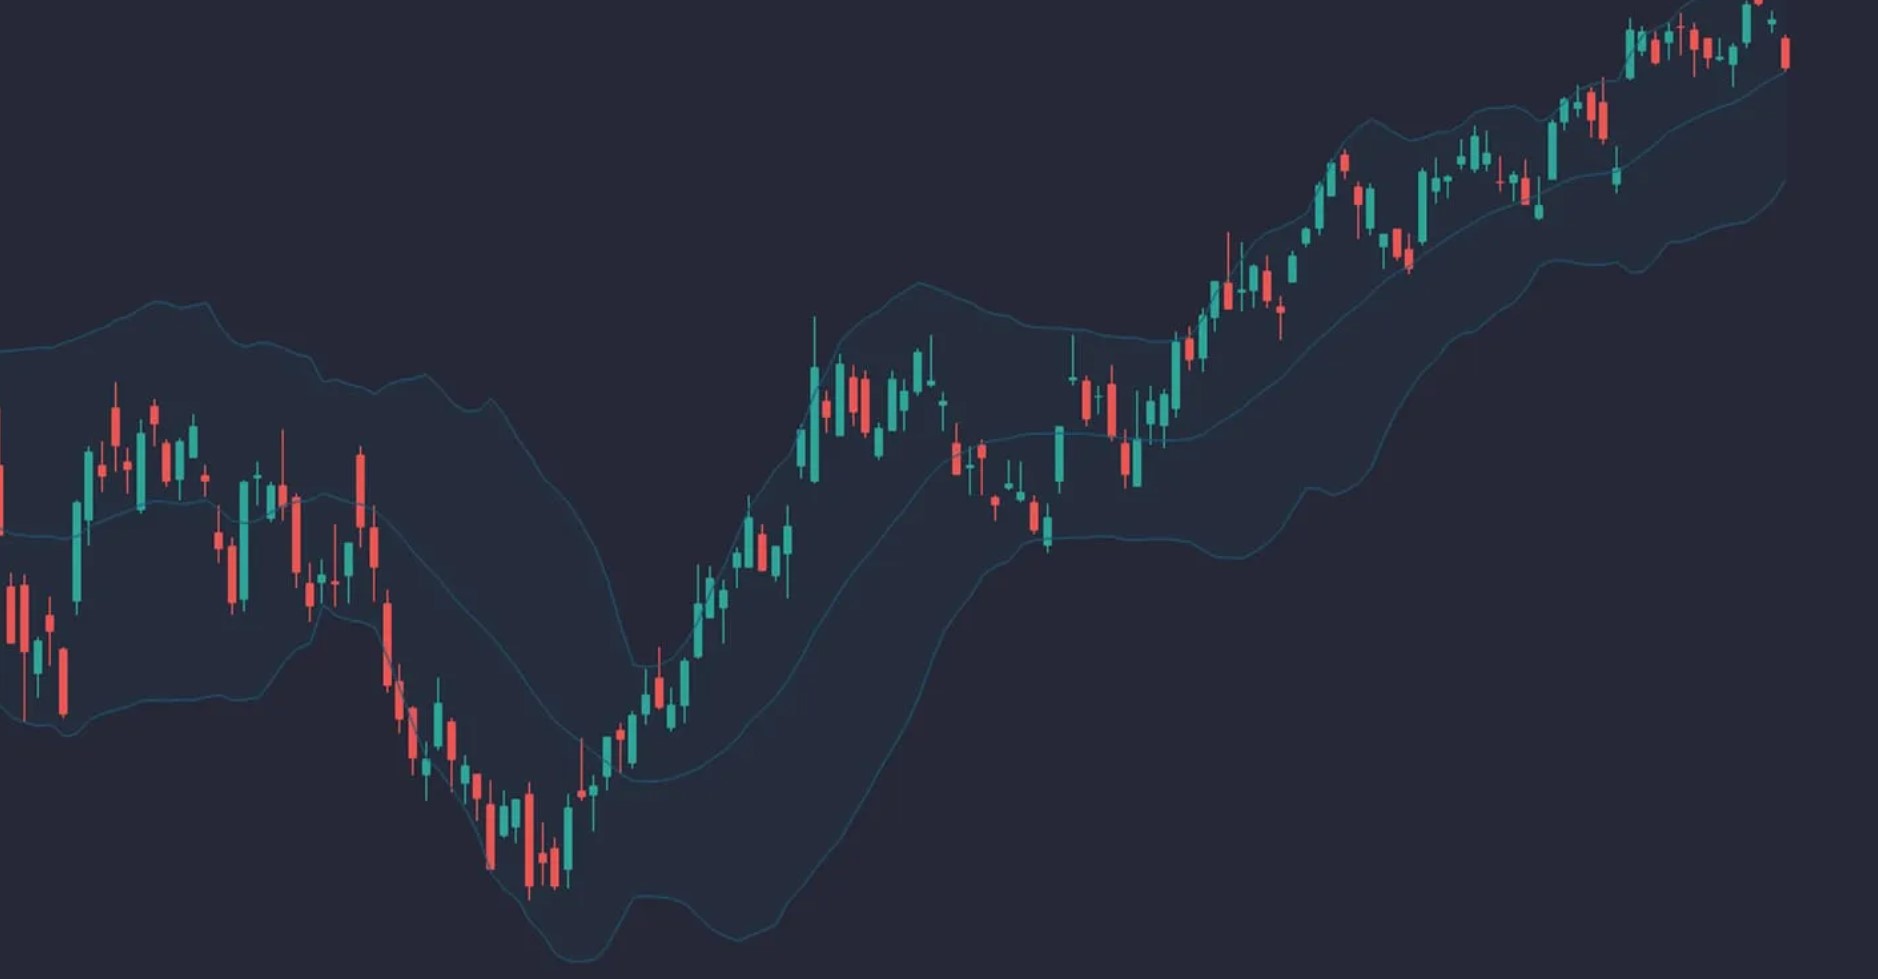 Bollinger Bands: A Guide for Traders